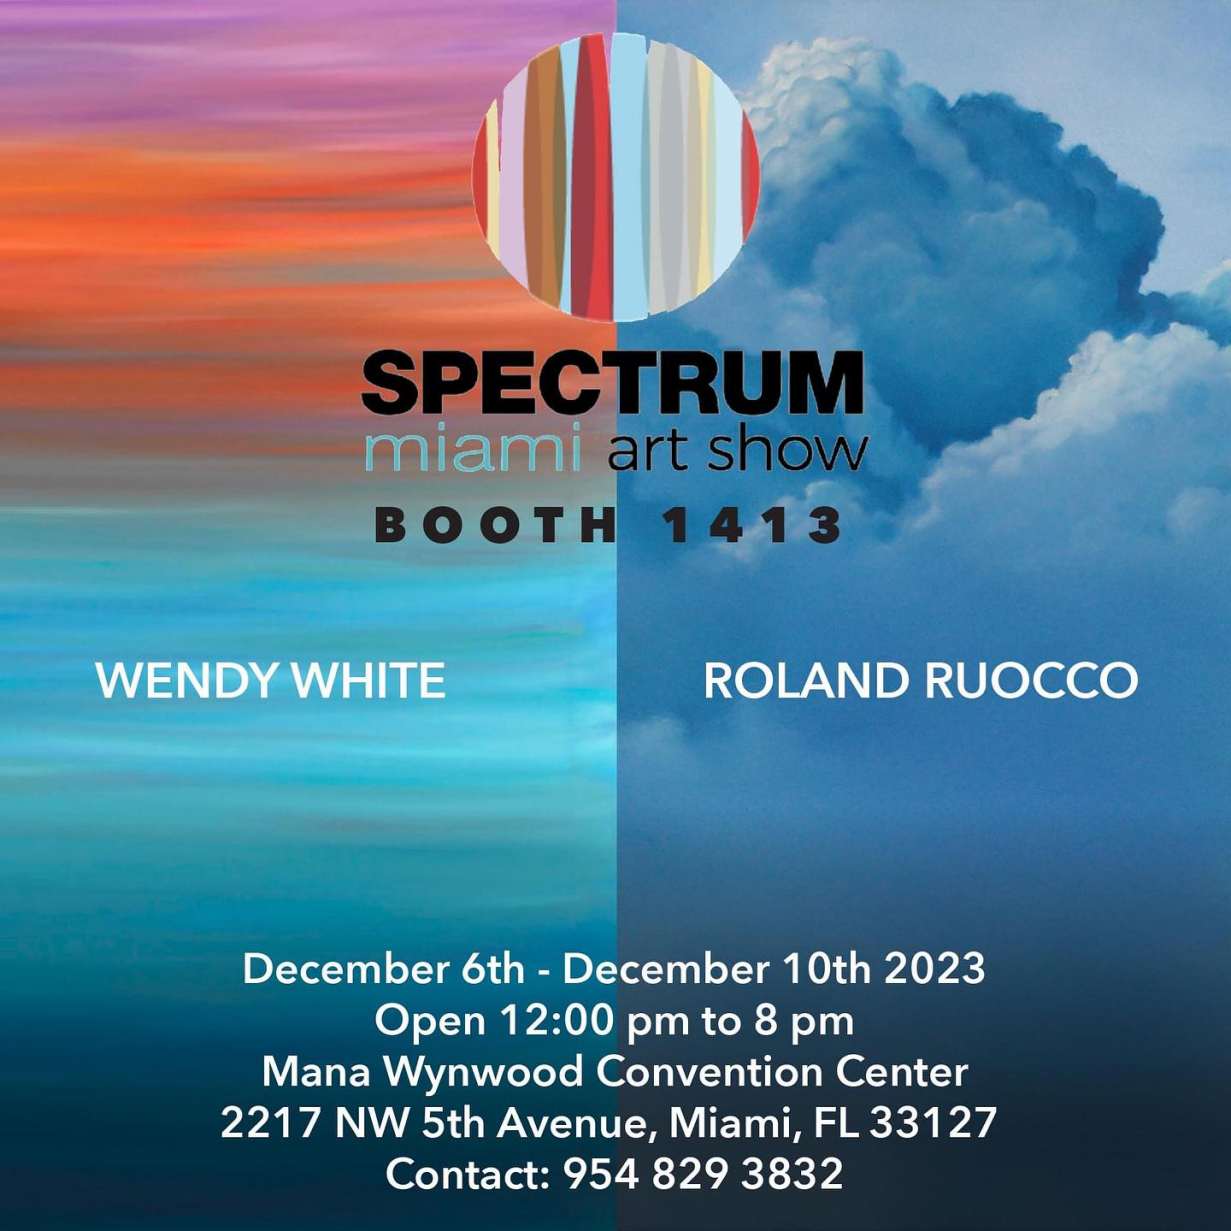 Spectrum Booth 1413 - Roland Ruocco & Wendy White